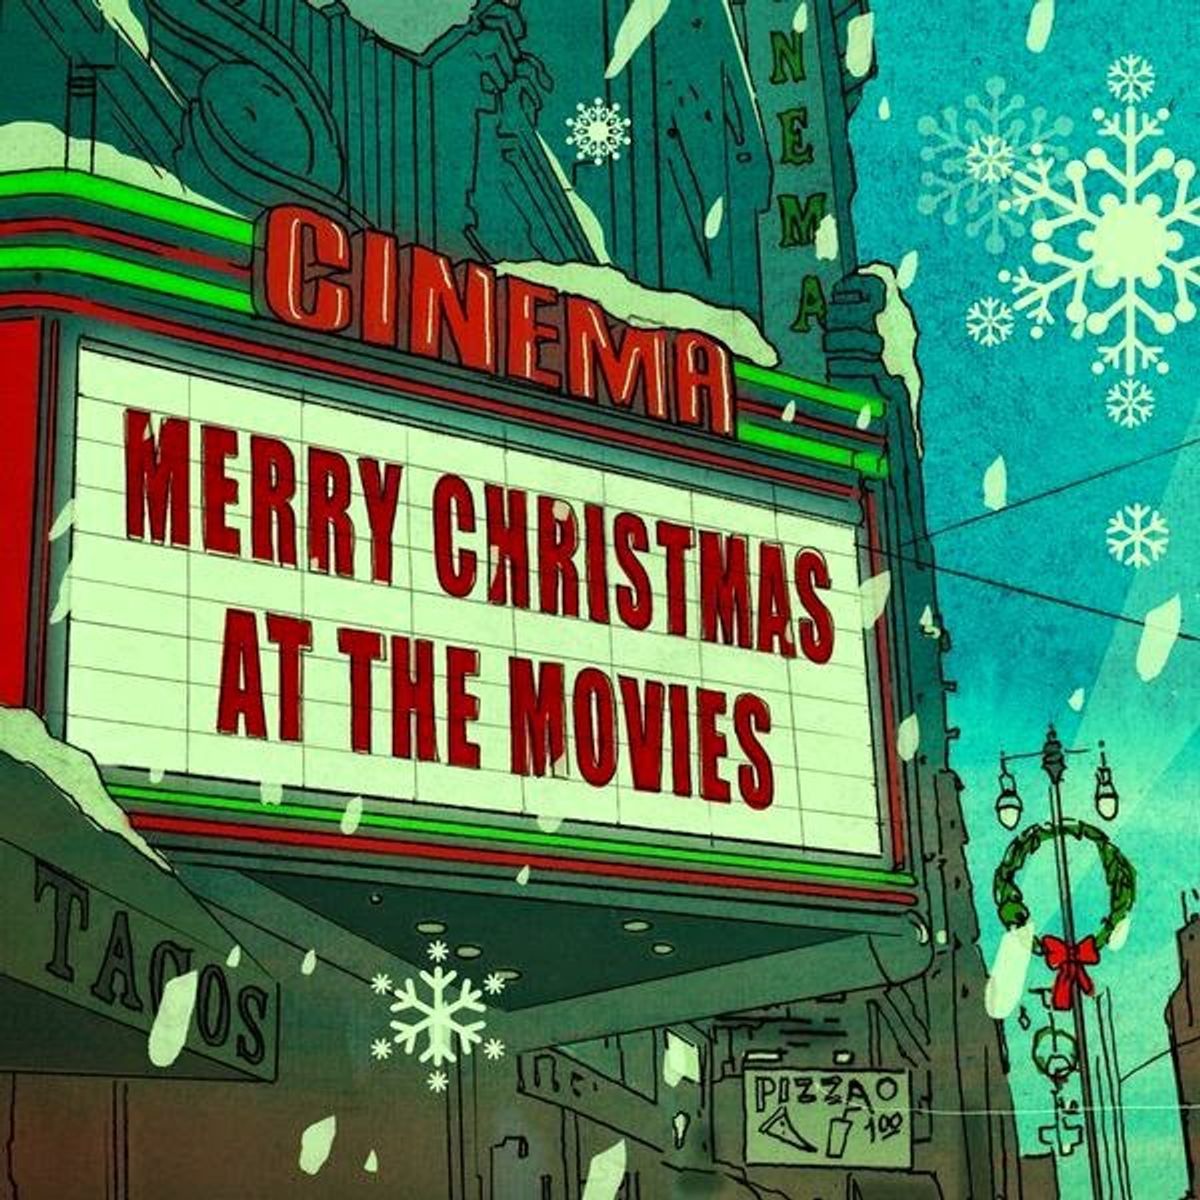 12 Of The Best Movies To Watch At Christmas